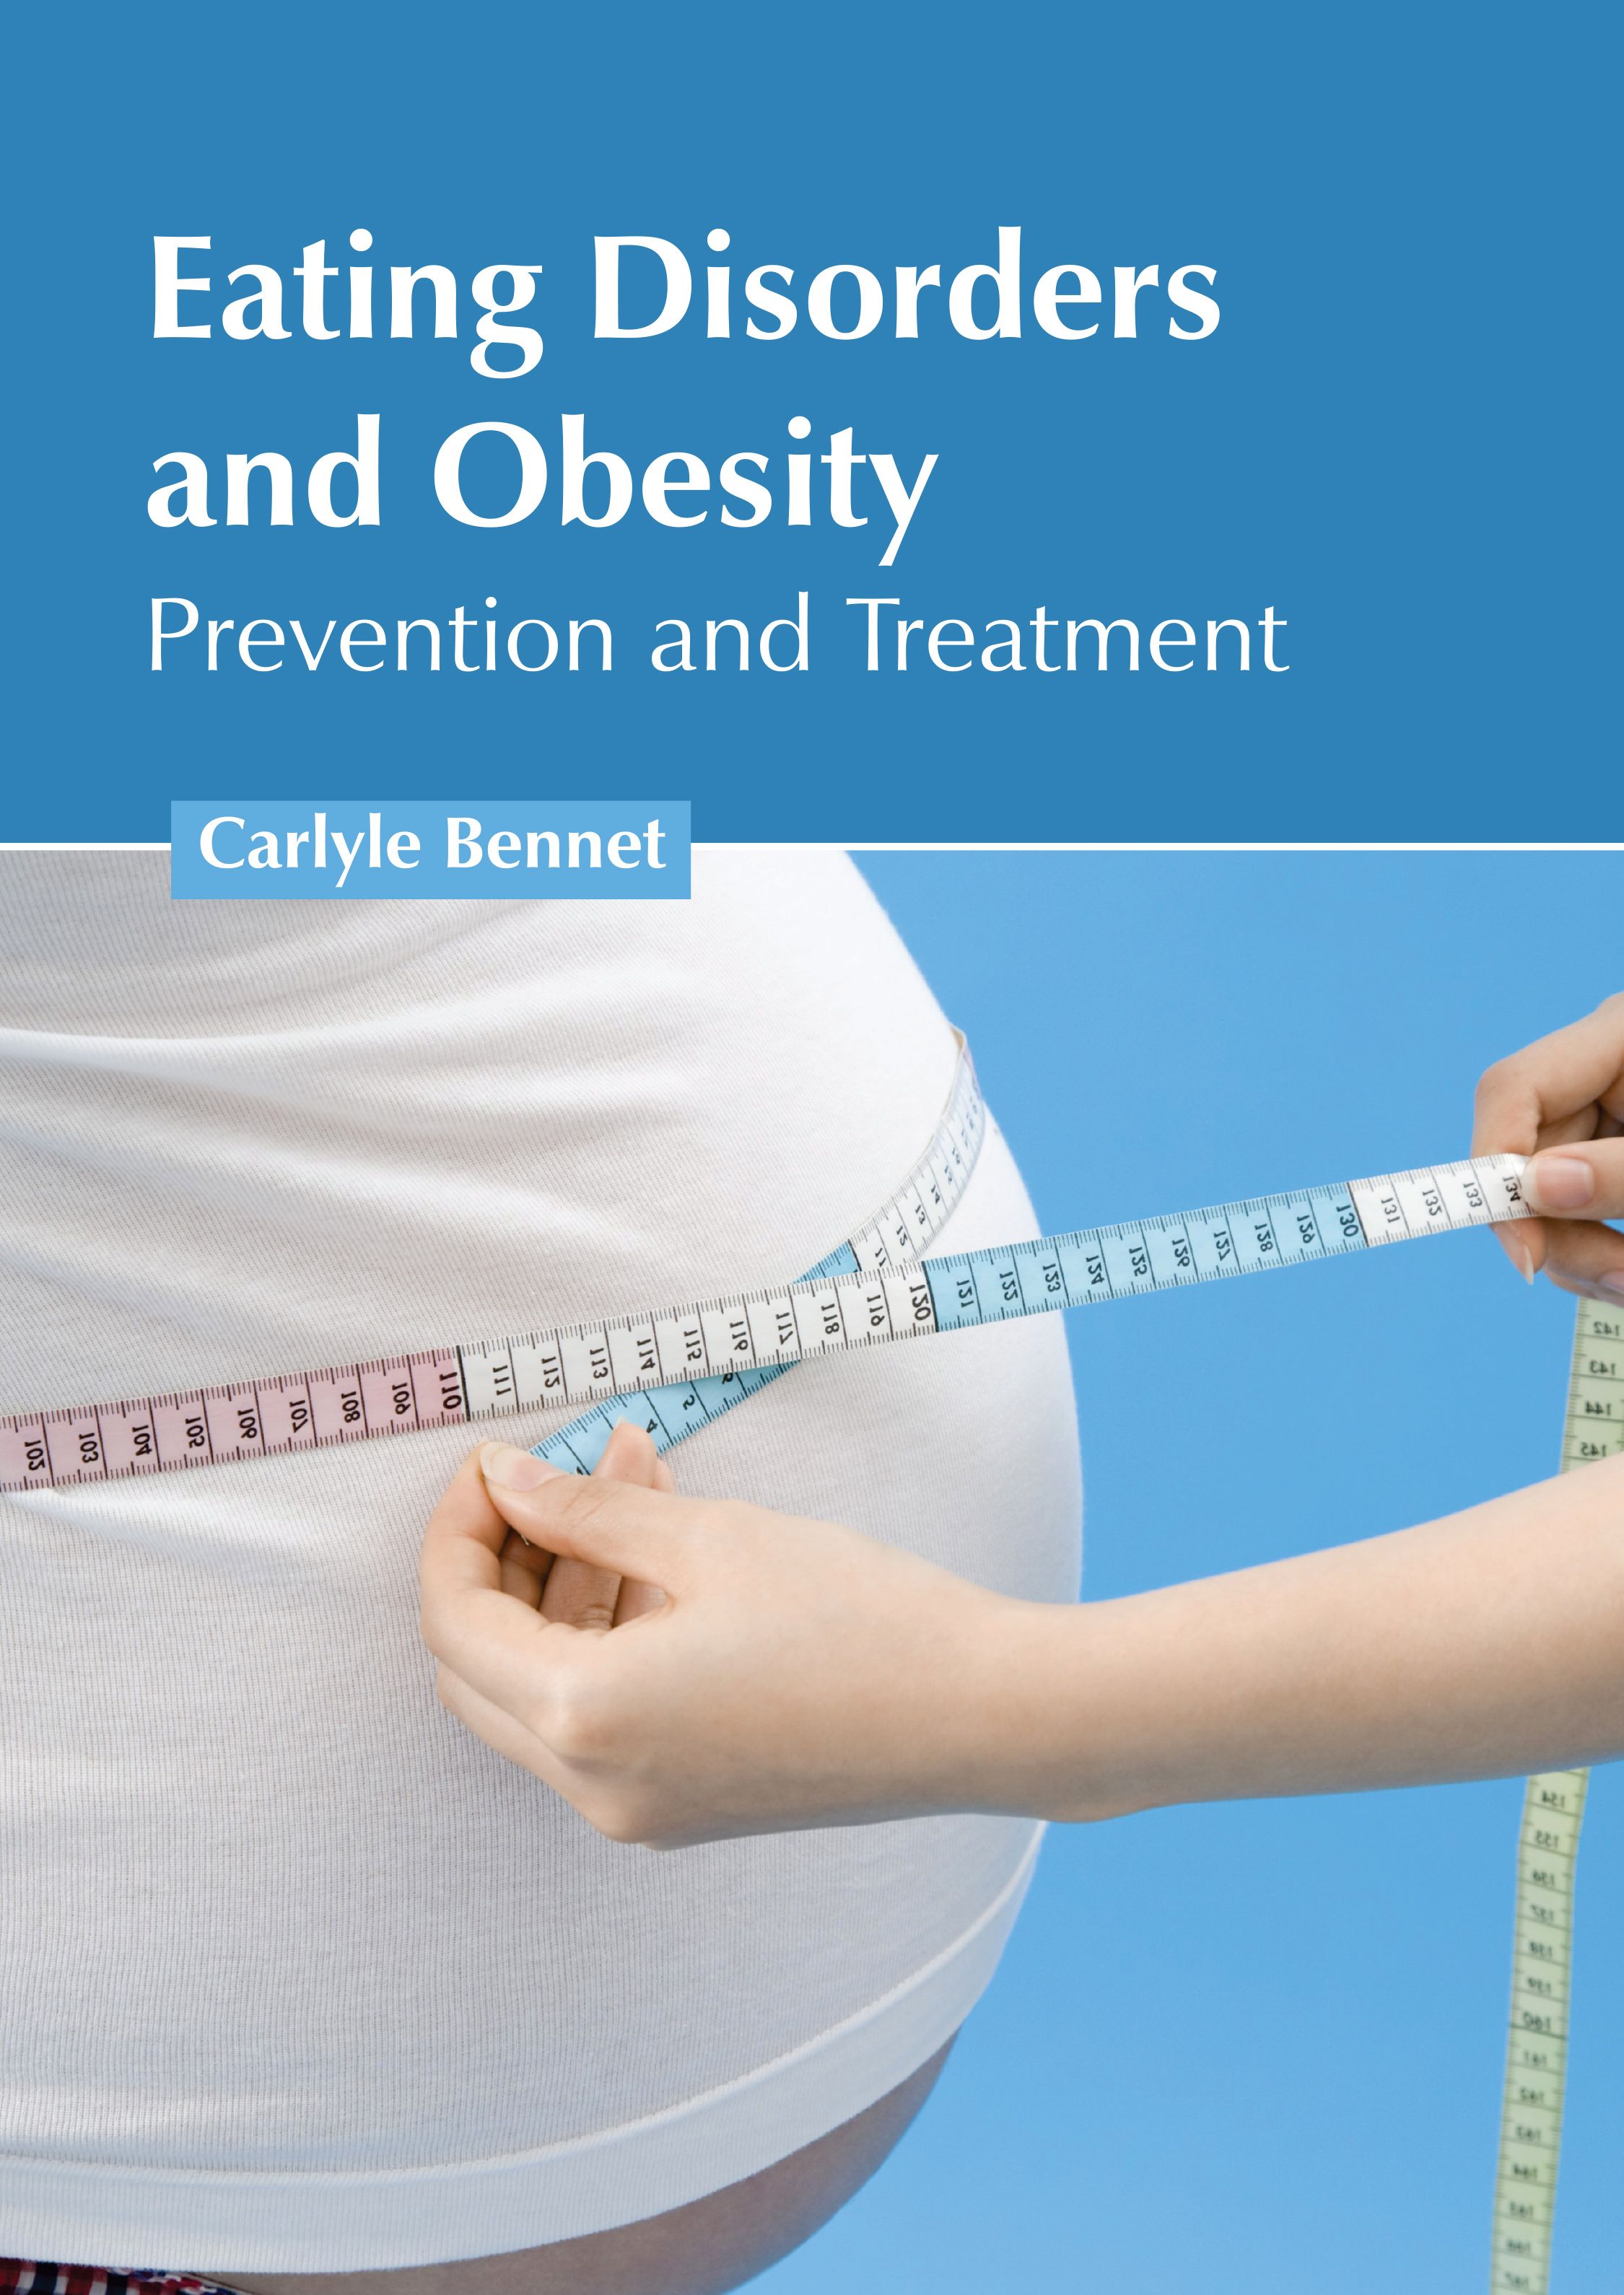 EATING DISORDERS AND OBESITY: PREVENTION AND TREATMENT